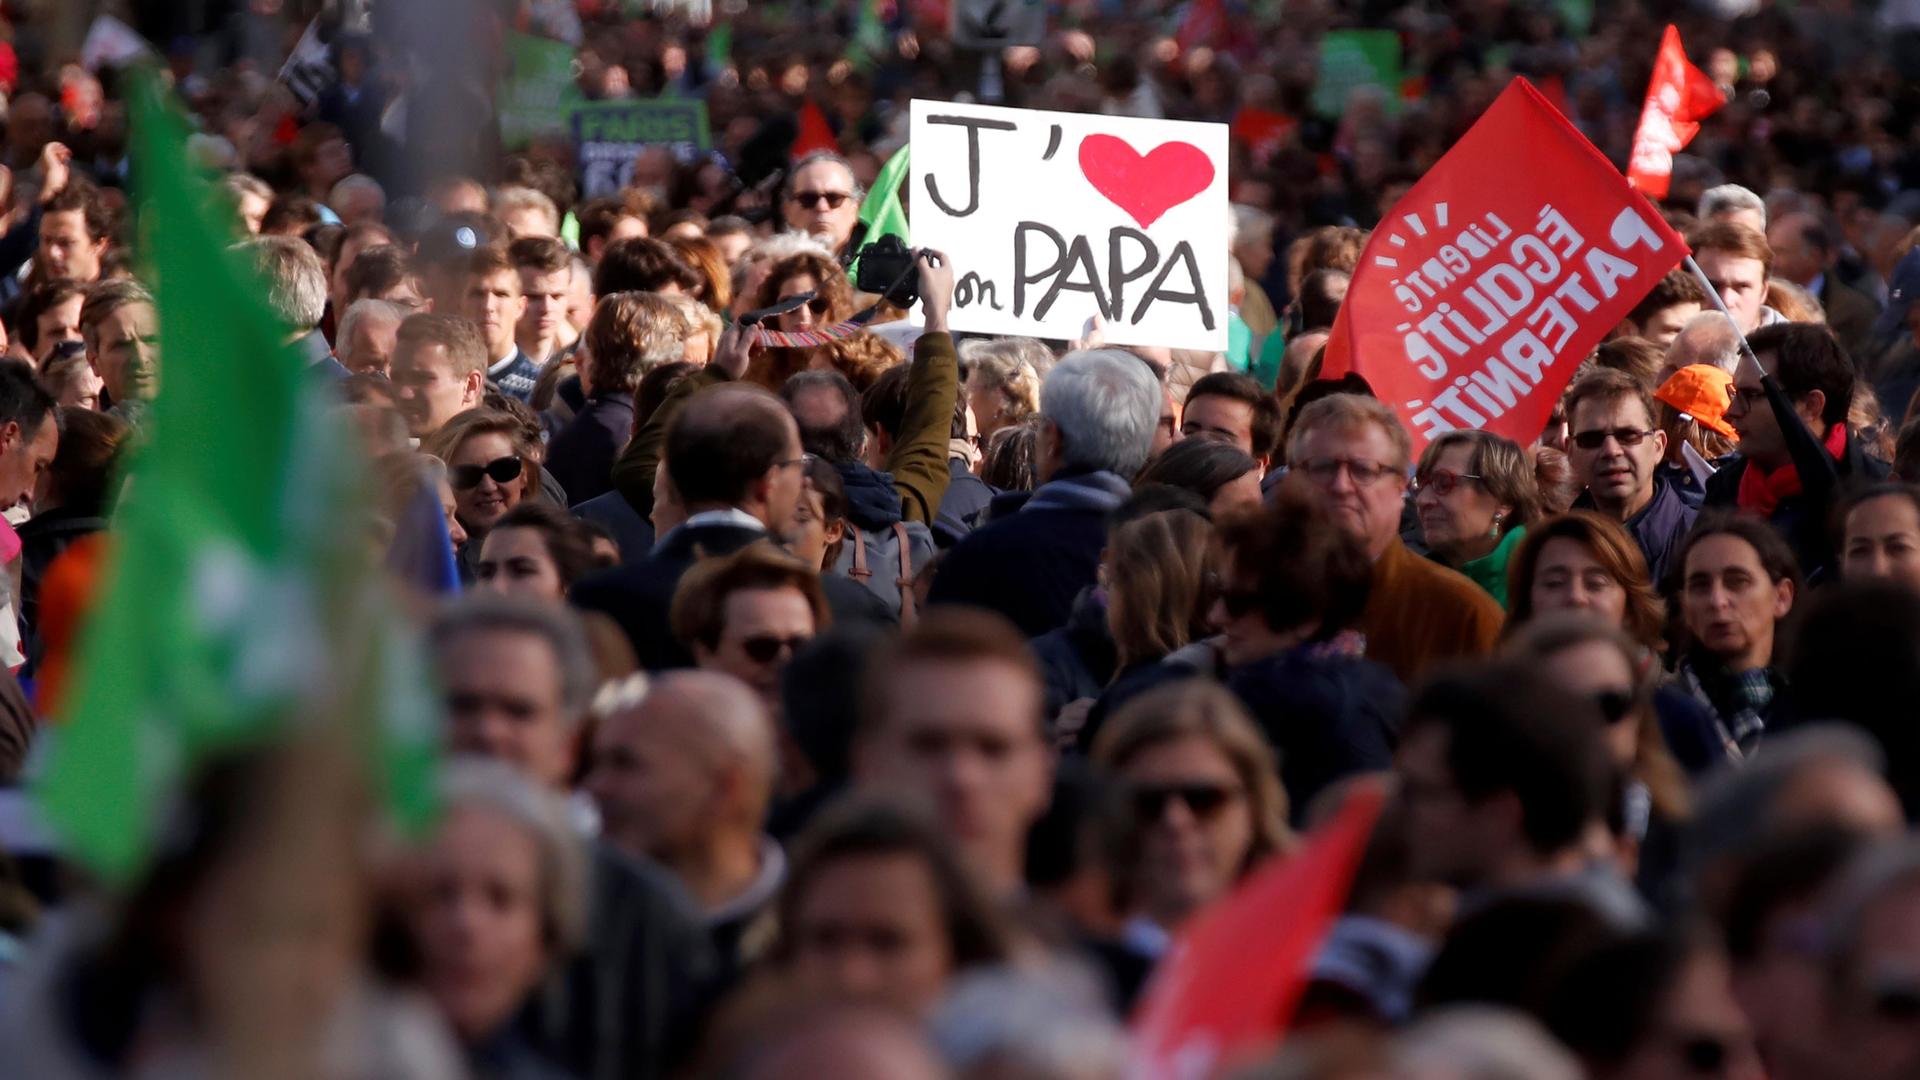 A crowd of people carry flags. One holds a sign that says "J'[HEART] Papa.